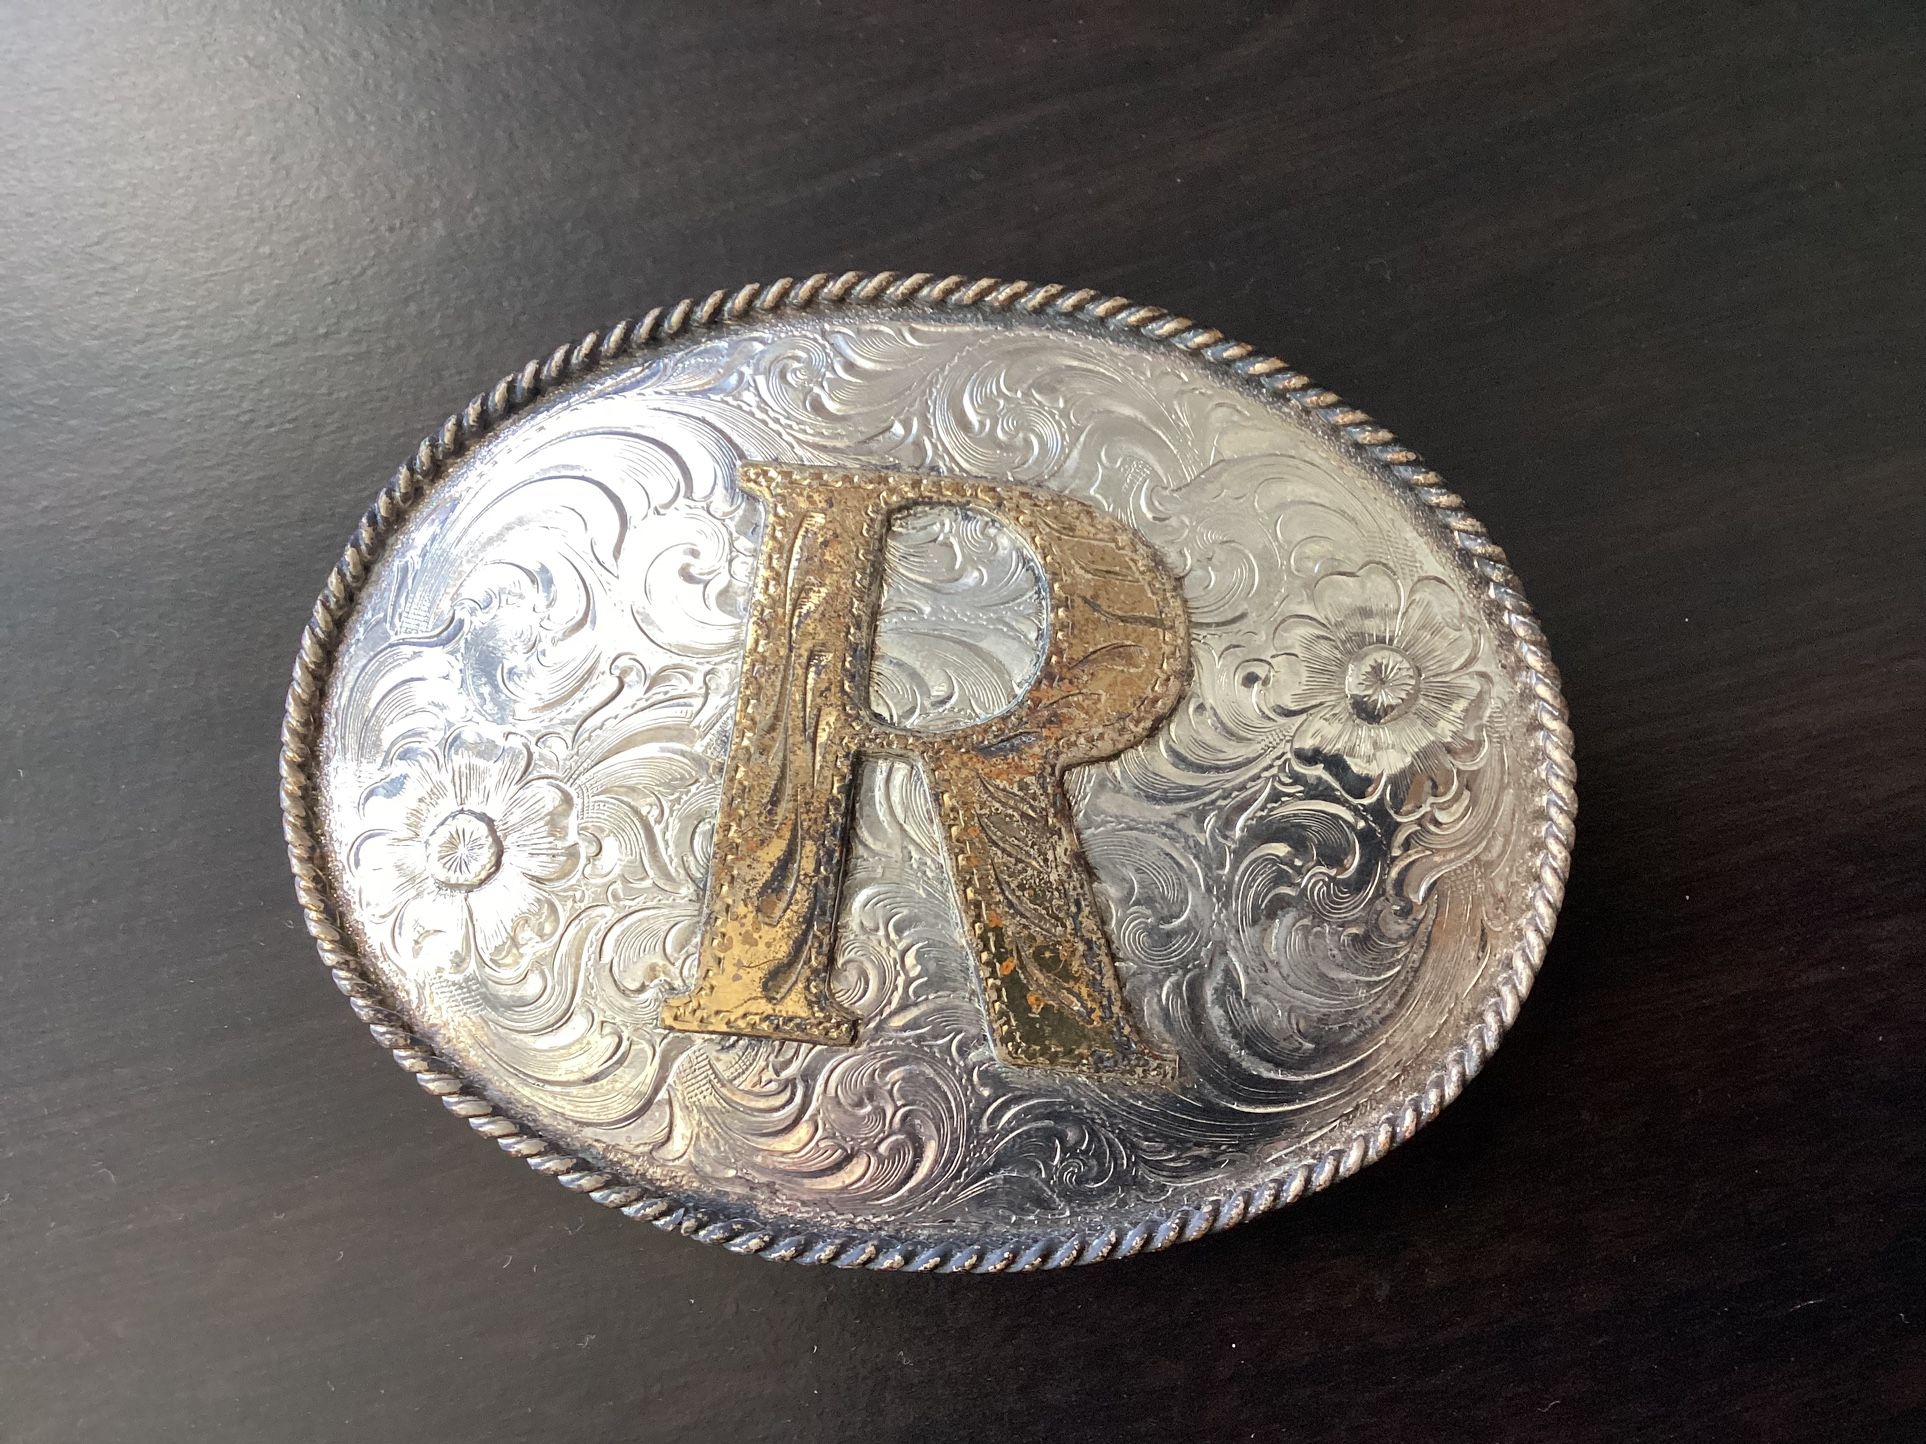 Vintage Initial “R” Belt Buckle Award Design Medals Noble Oklahoma Western Style Silver Plated Hand Engraved USA